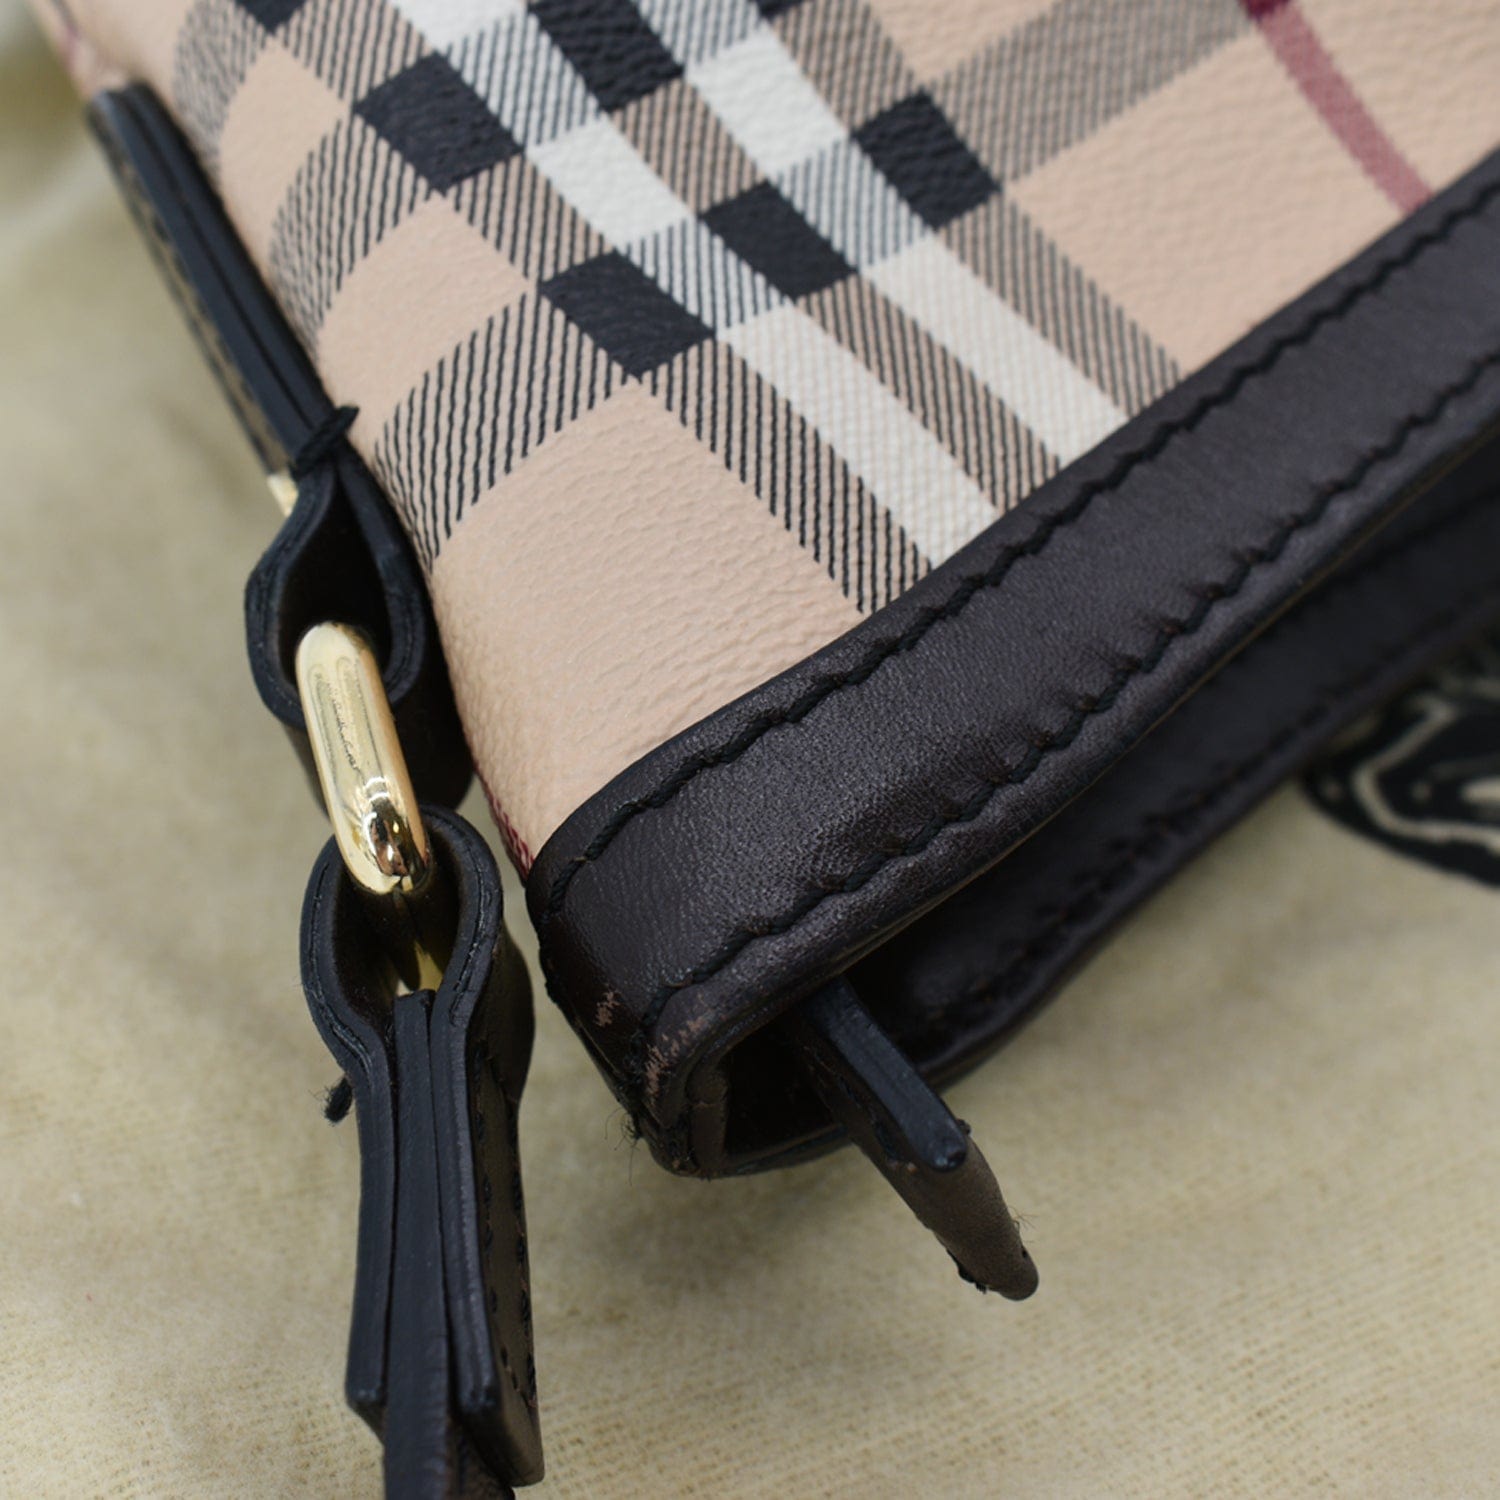 Burberry Beige Haymarket Check Coated Canvas And Leather Hartham Cross